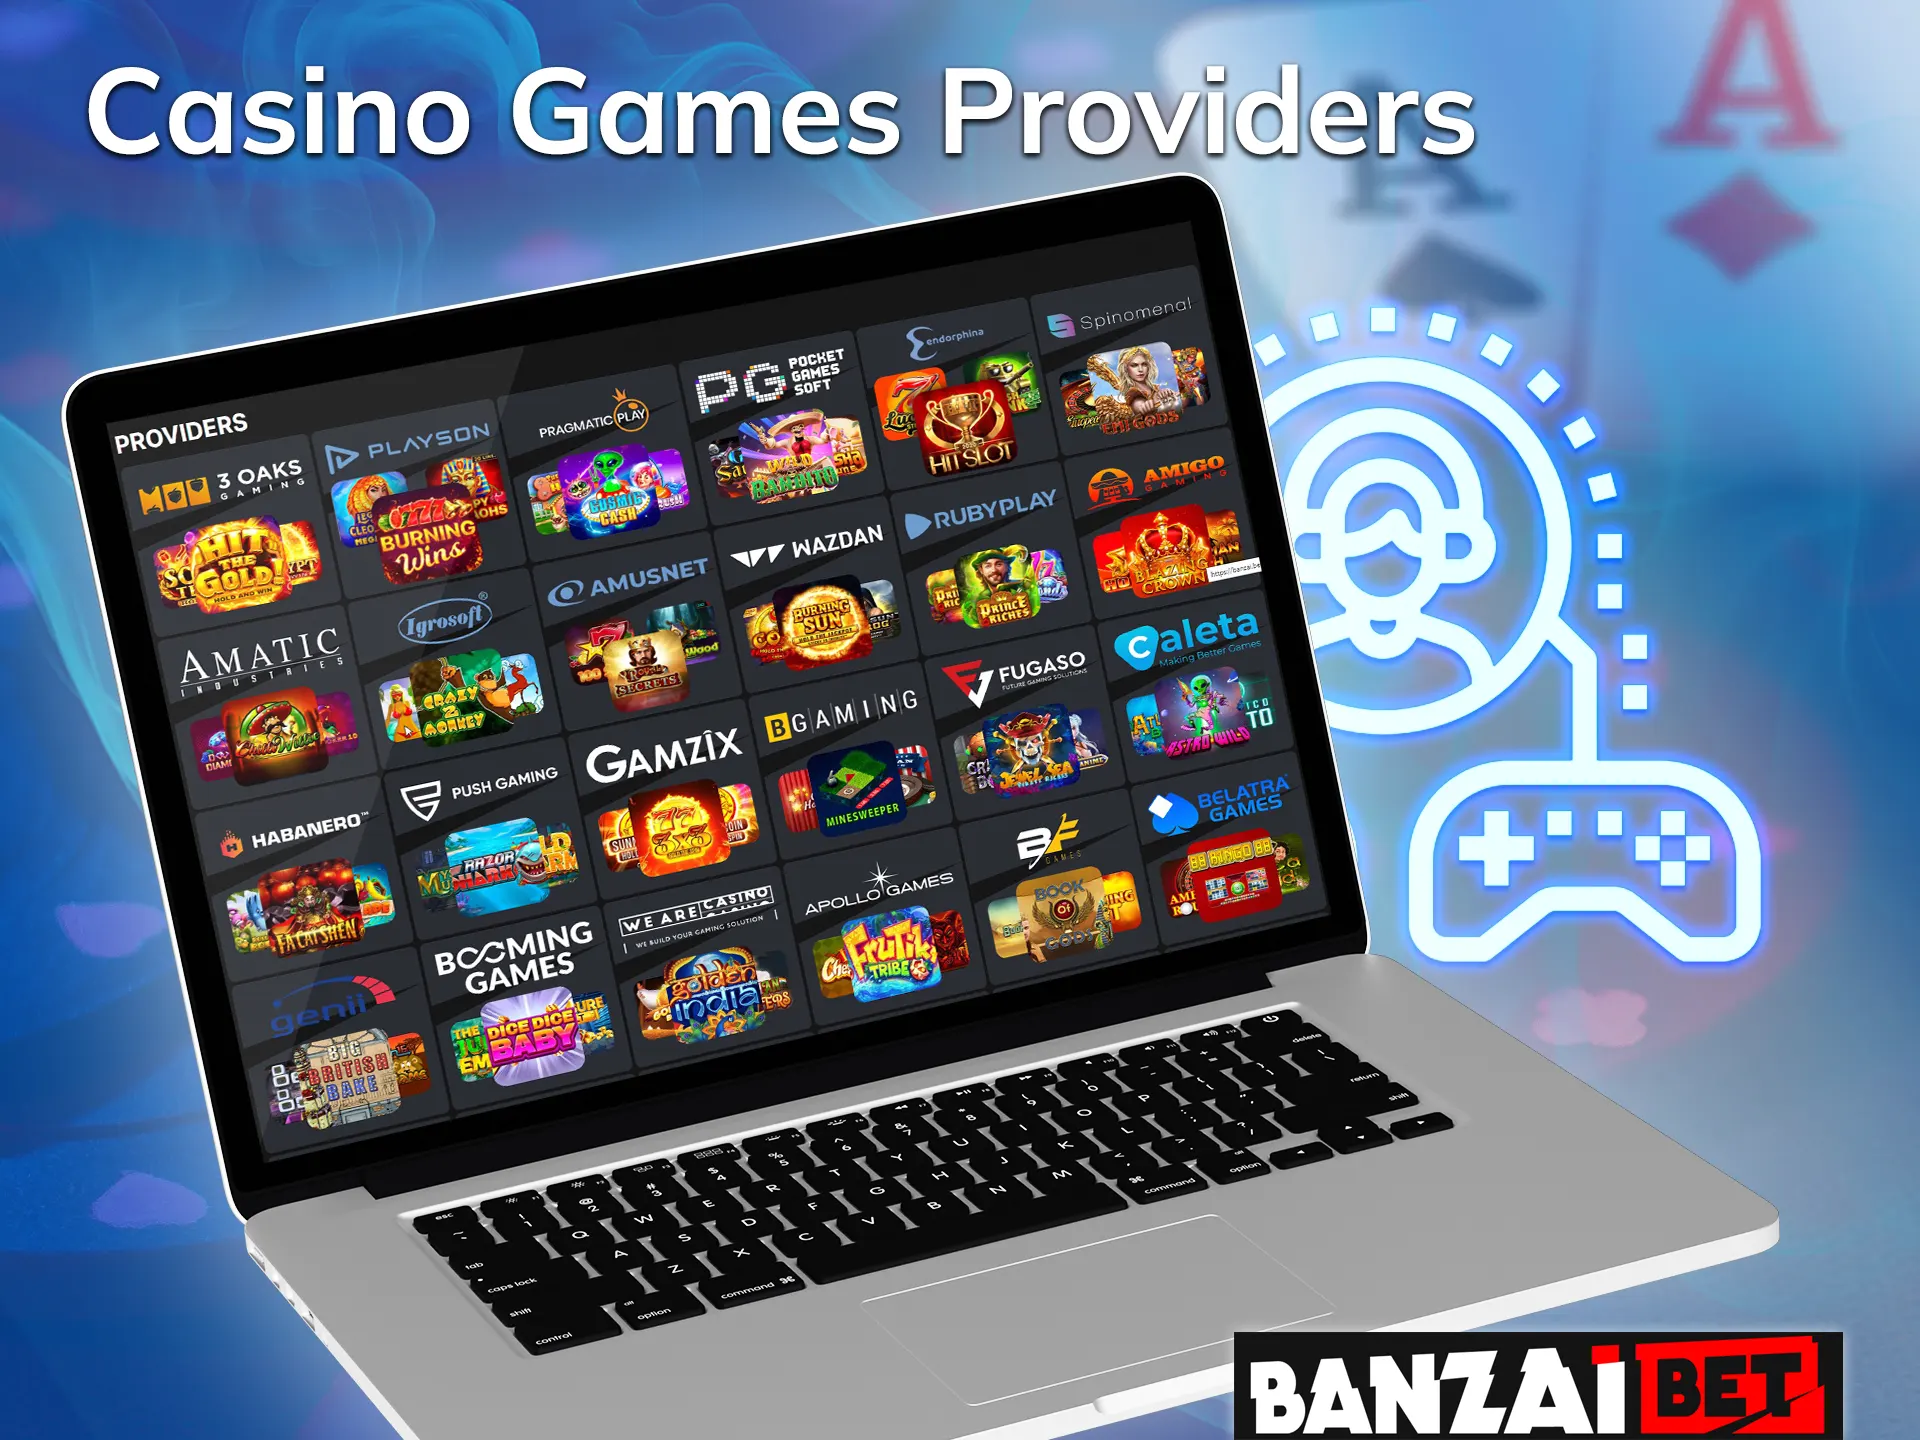 Explore the large list of game providers featured at Banzai Bet.